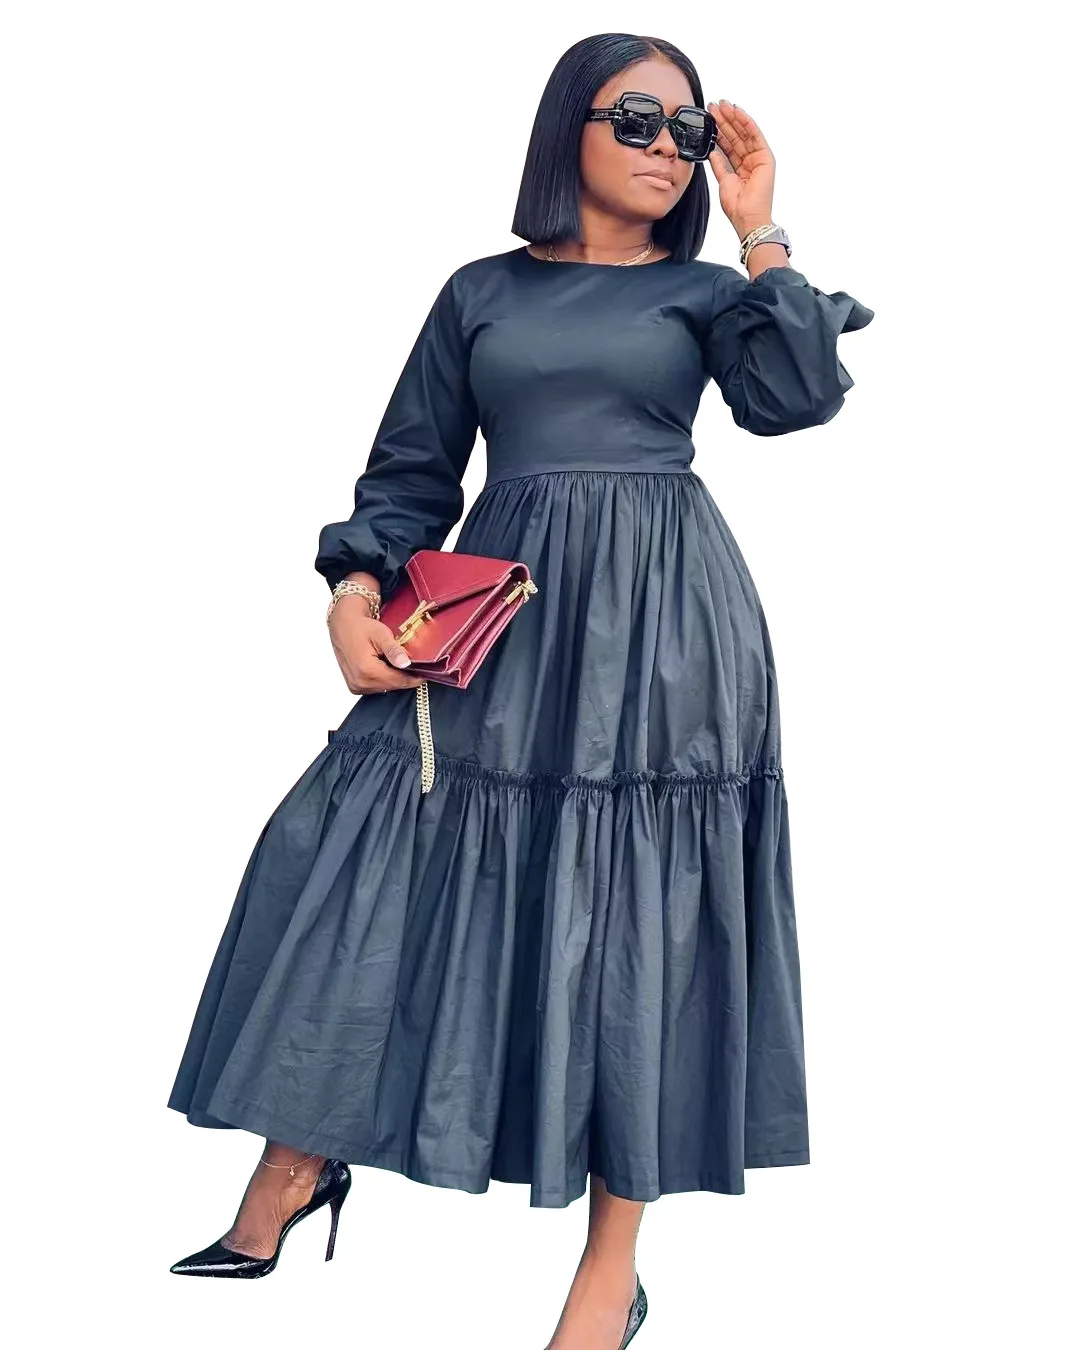 Elegant Women Casual Dresses Solid Color O-Neck Lantern Sleeve High Waist Sashes Ankle-length Pleated Dress Autumn 2022 New african dress style